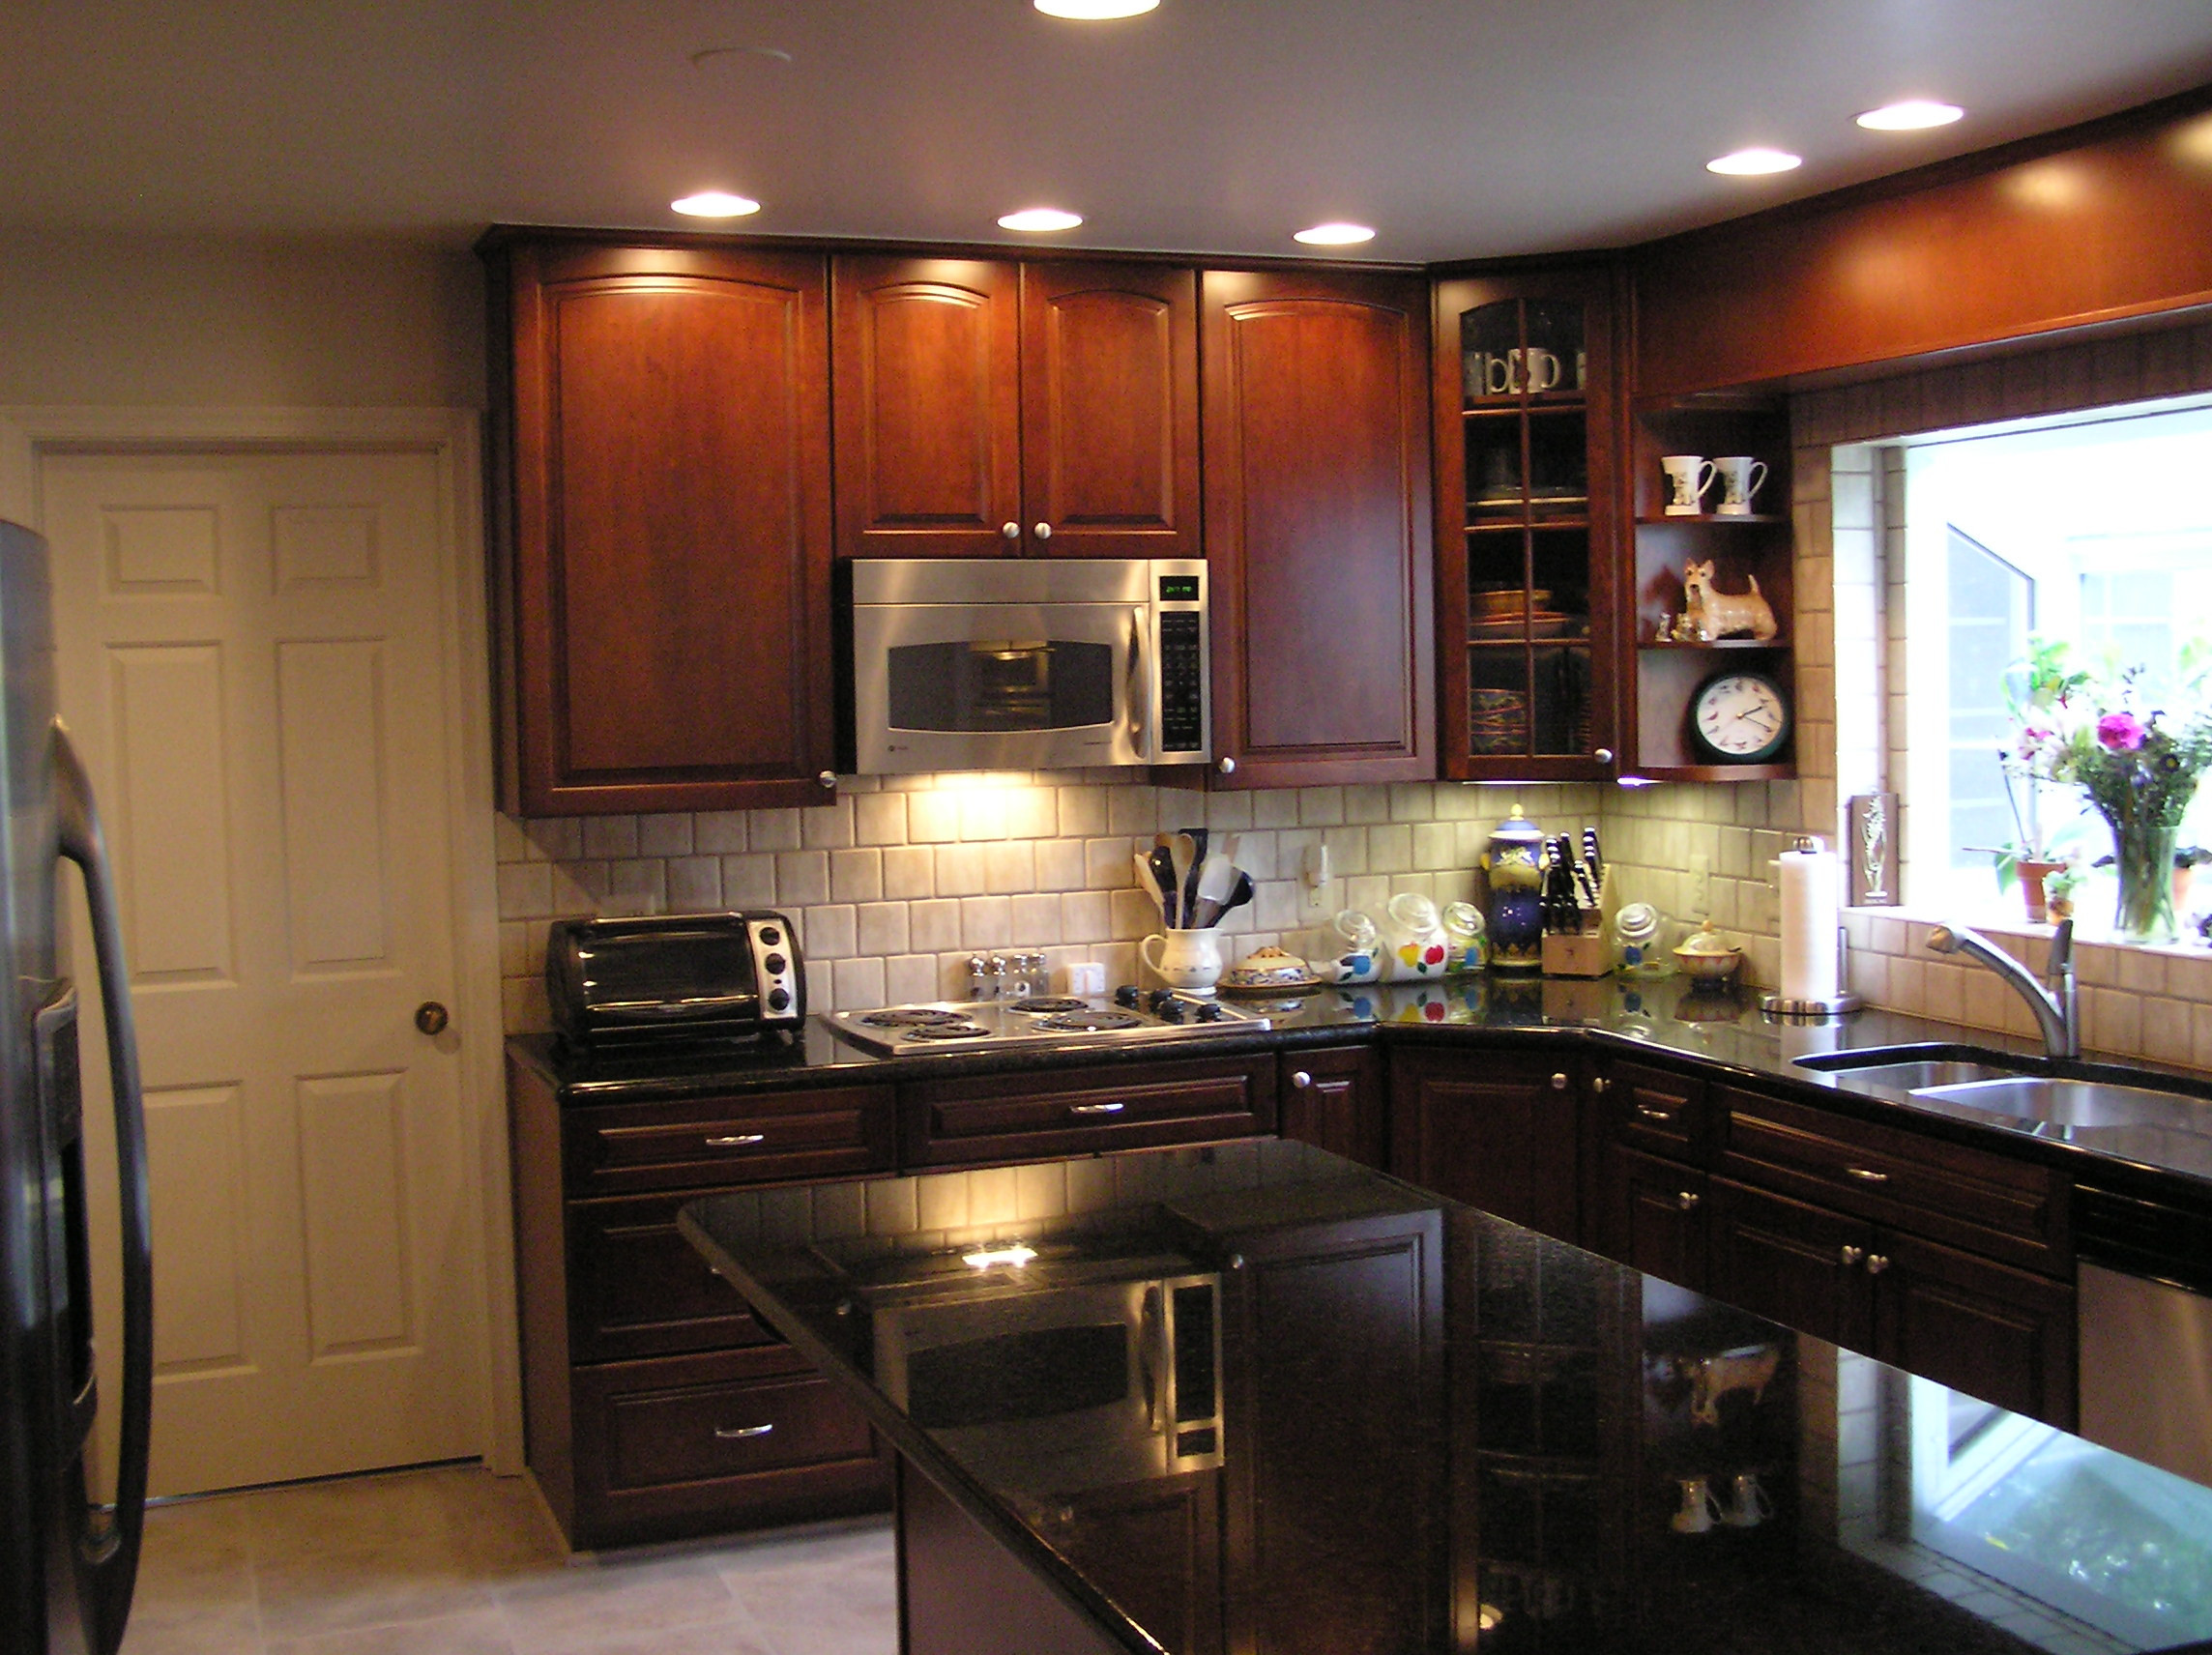 Remodeled Kitchen Ideas
 Small Kitchen Remodel Ideas